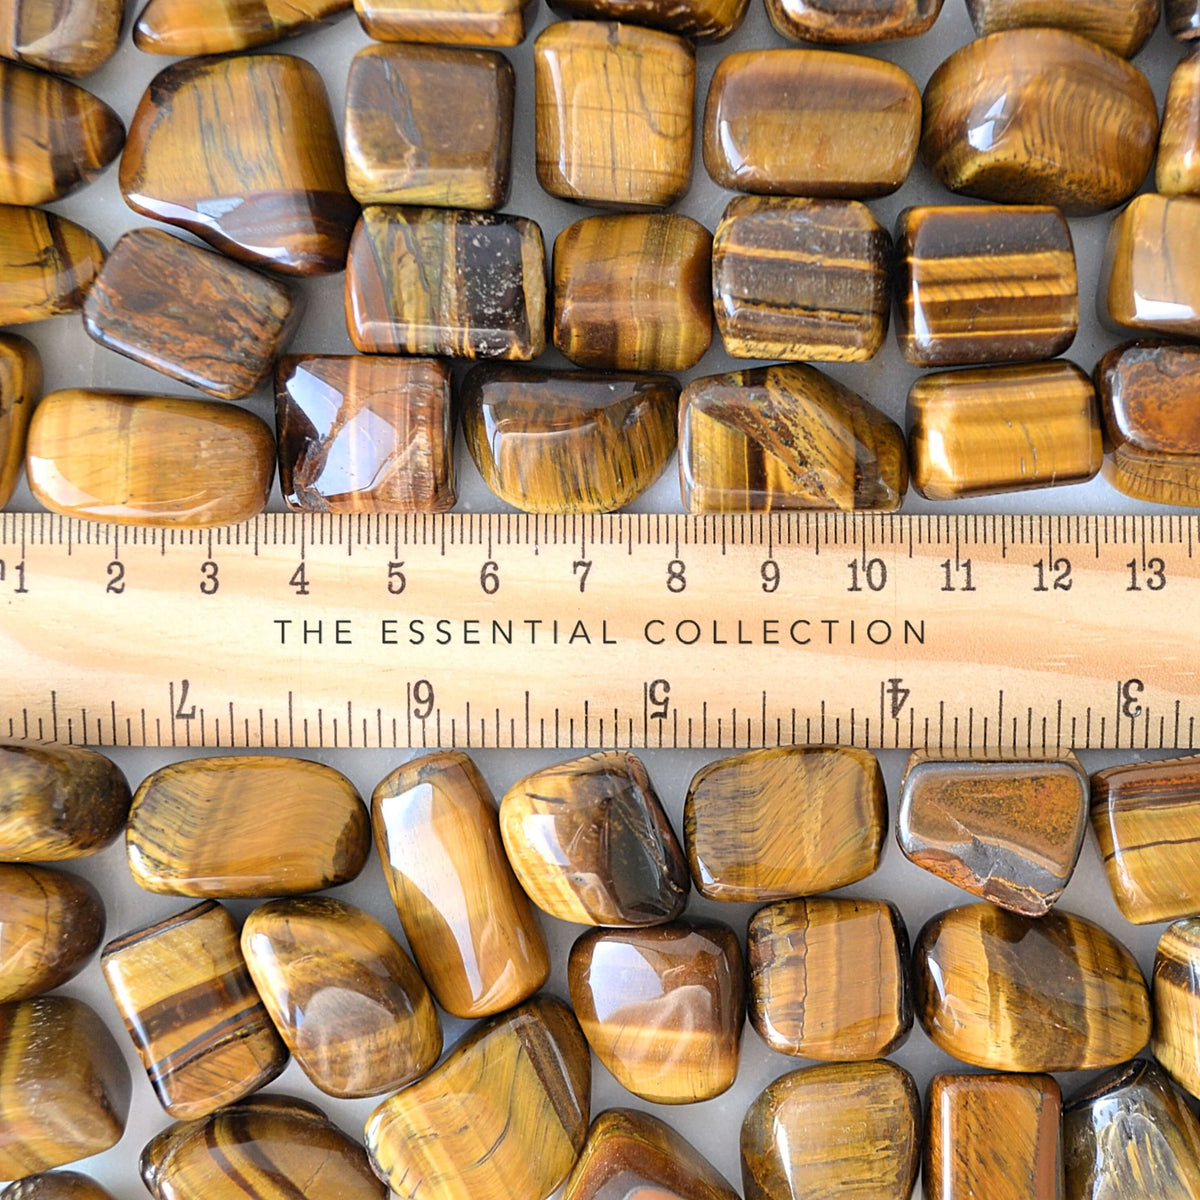 tigers eye tumbled tumbles with ruler showing size